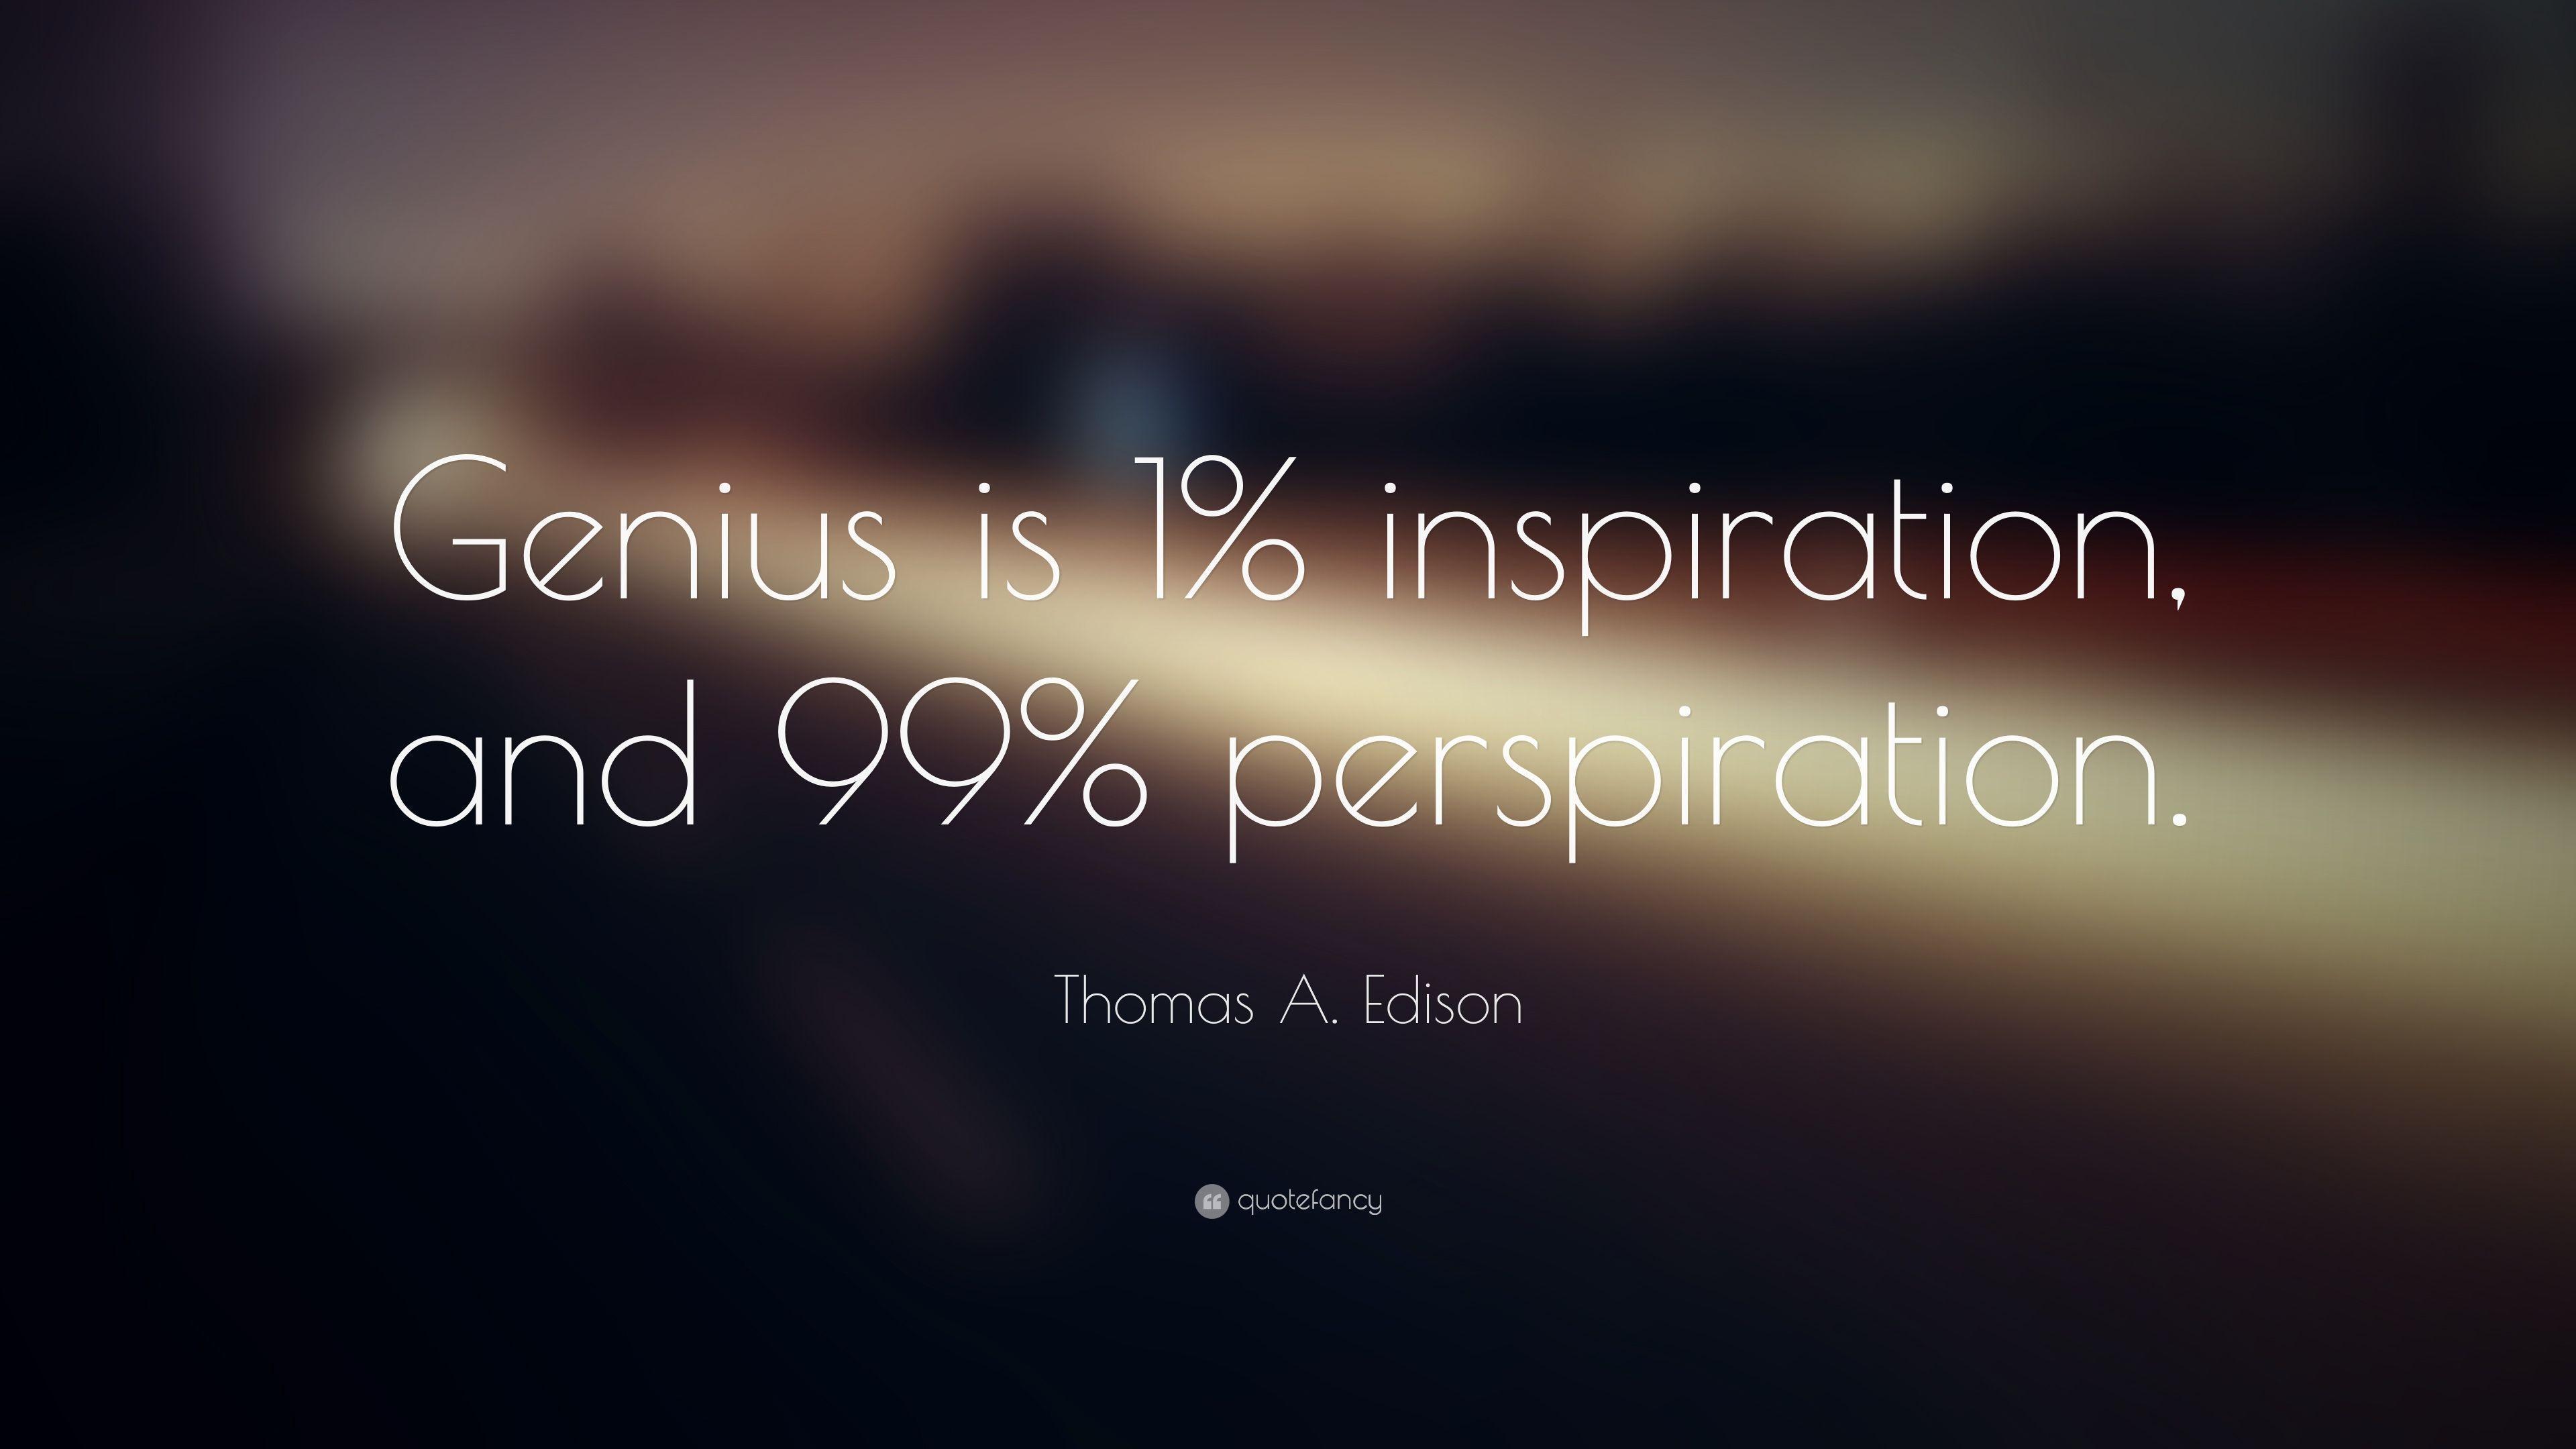 Thomas A. Edison Quote: “Genius is 1% inspiration, and 99